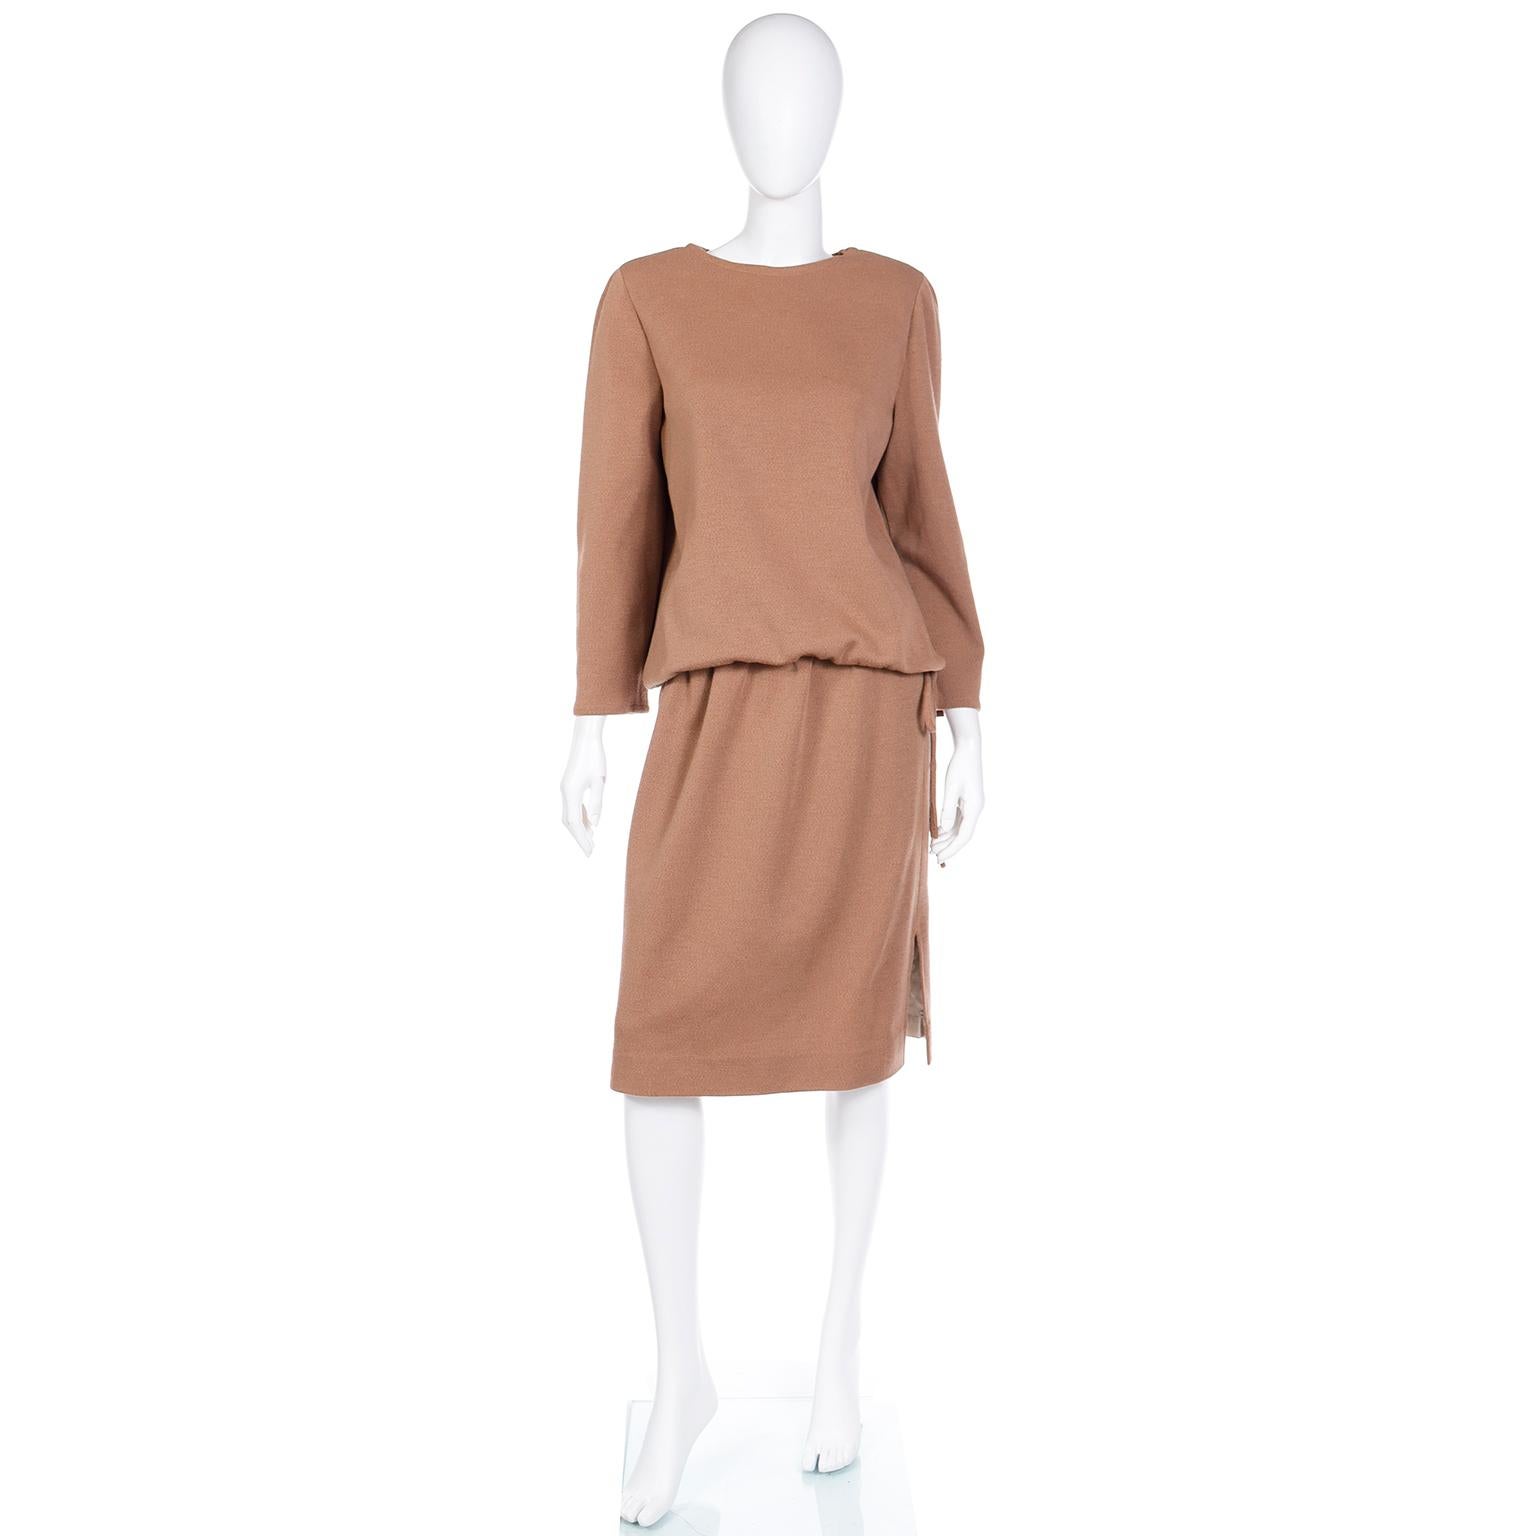 This minimalist 2 piece vintage Bill Blass outfit is in a camel colored knit and it includes a drawstring waist long sleeve top and a skirt. This vintage Bill Blass ensemble is a great alternative to a day dress and it is so easy to wear and looks